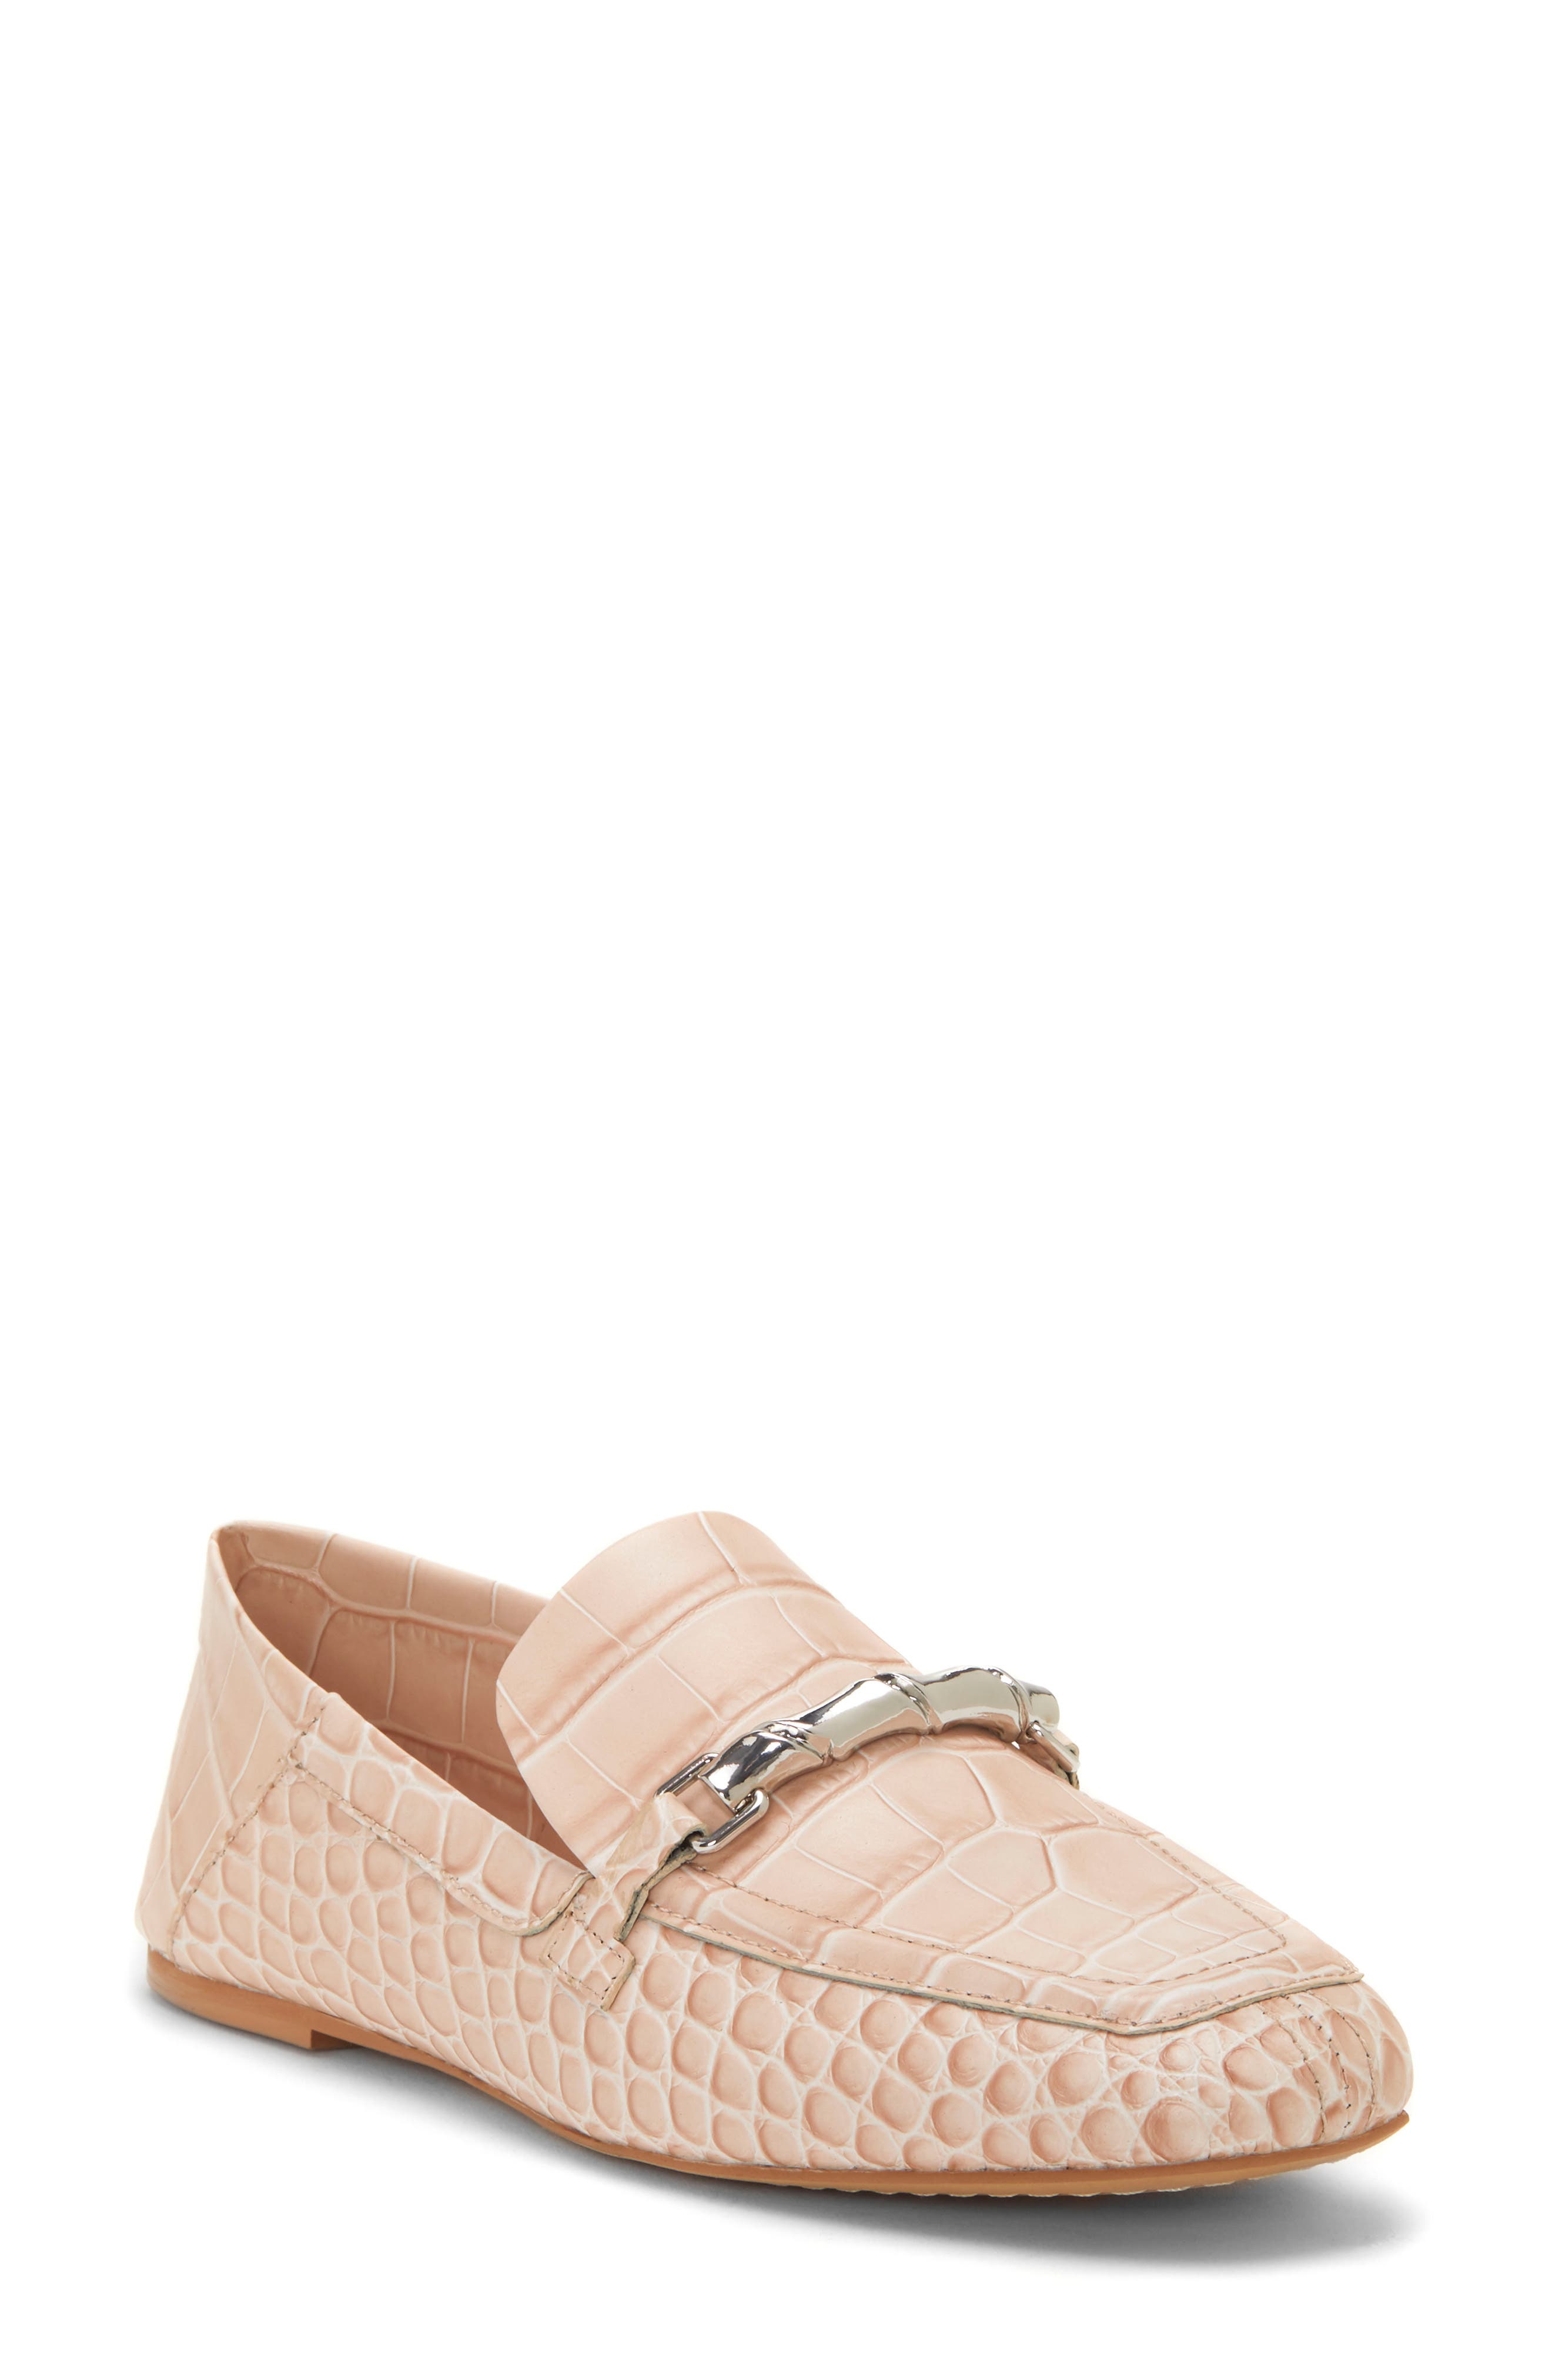 Women's Vince Camuto Flat Loafers 